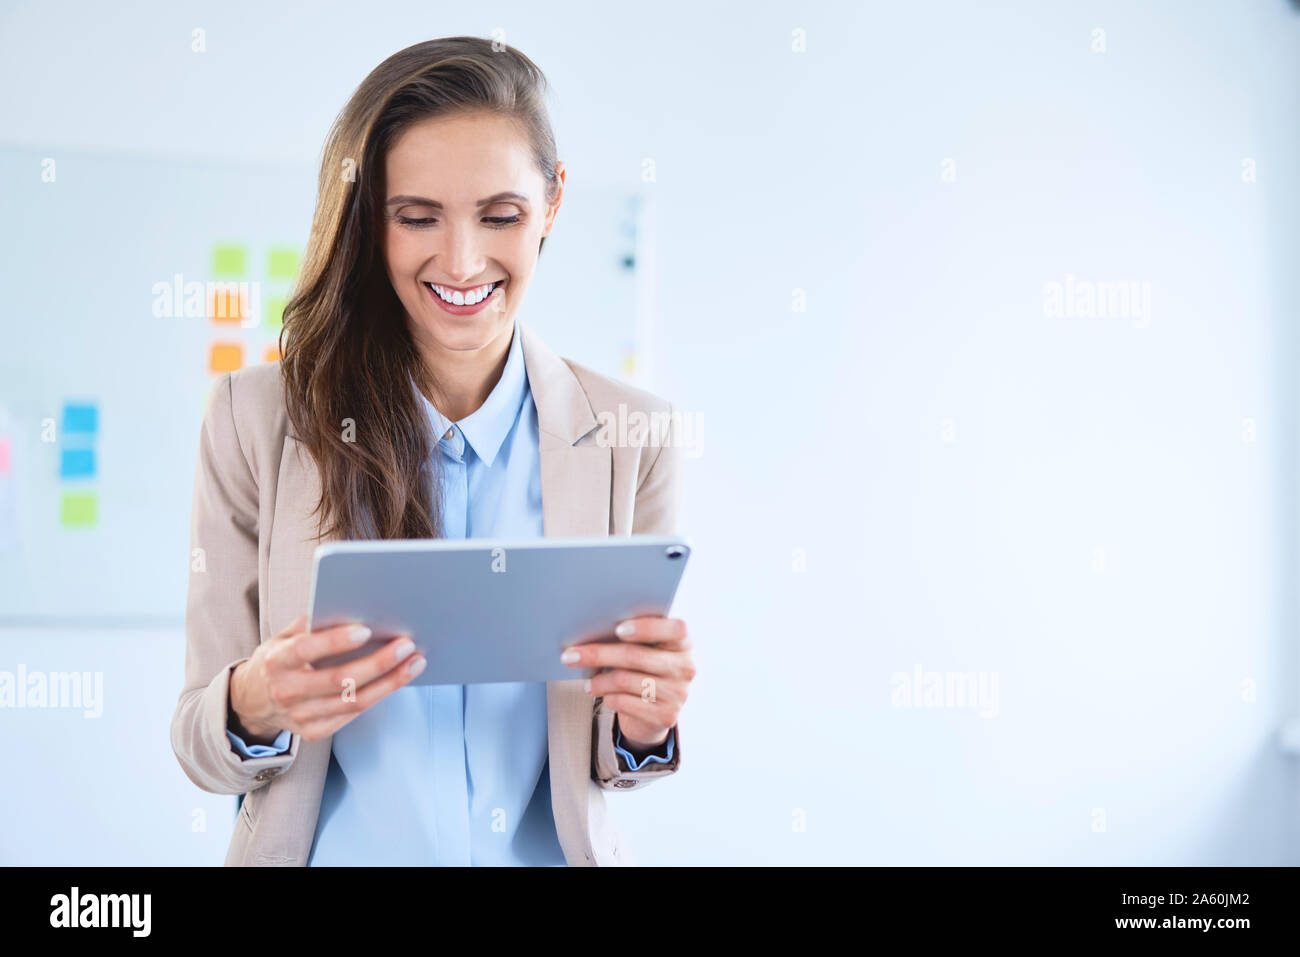 Smiling businesswoman using tablet in office Stock Photo